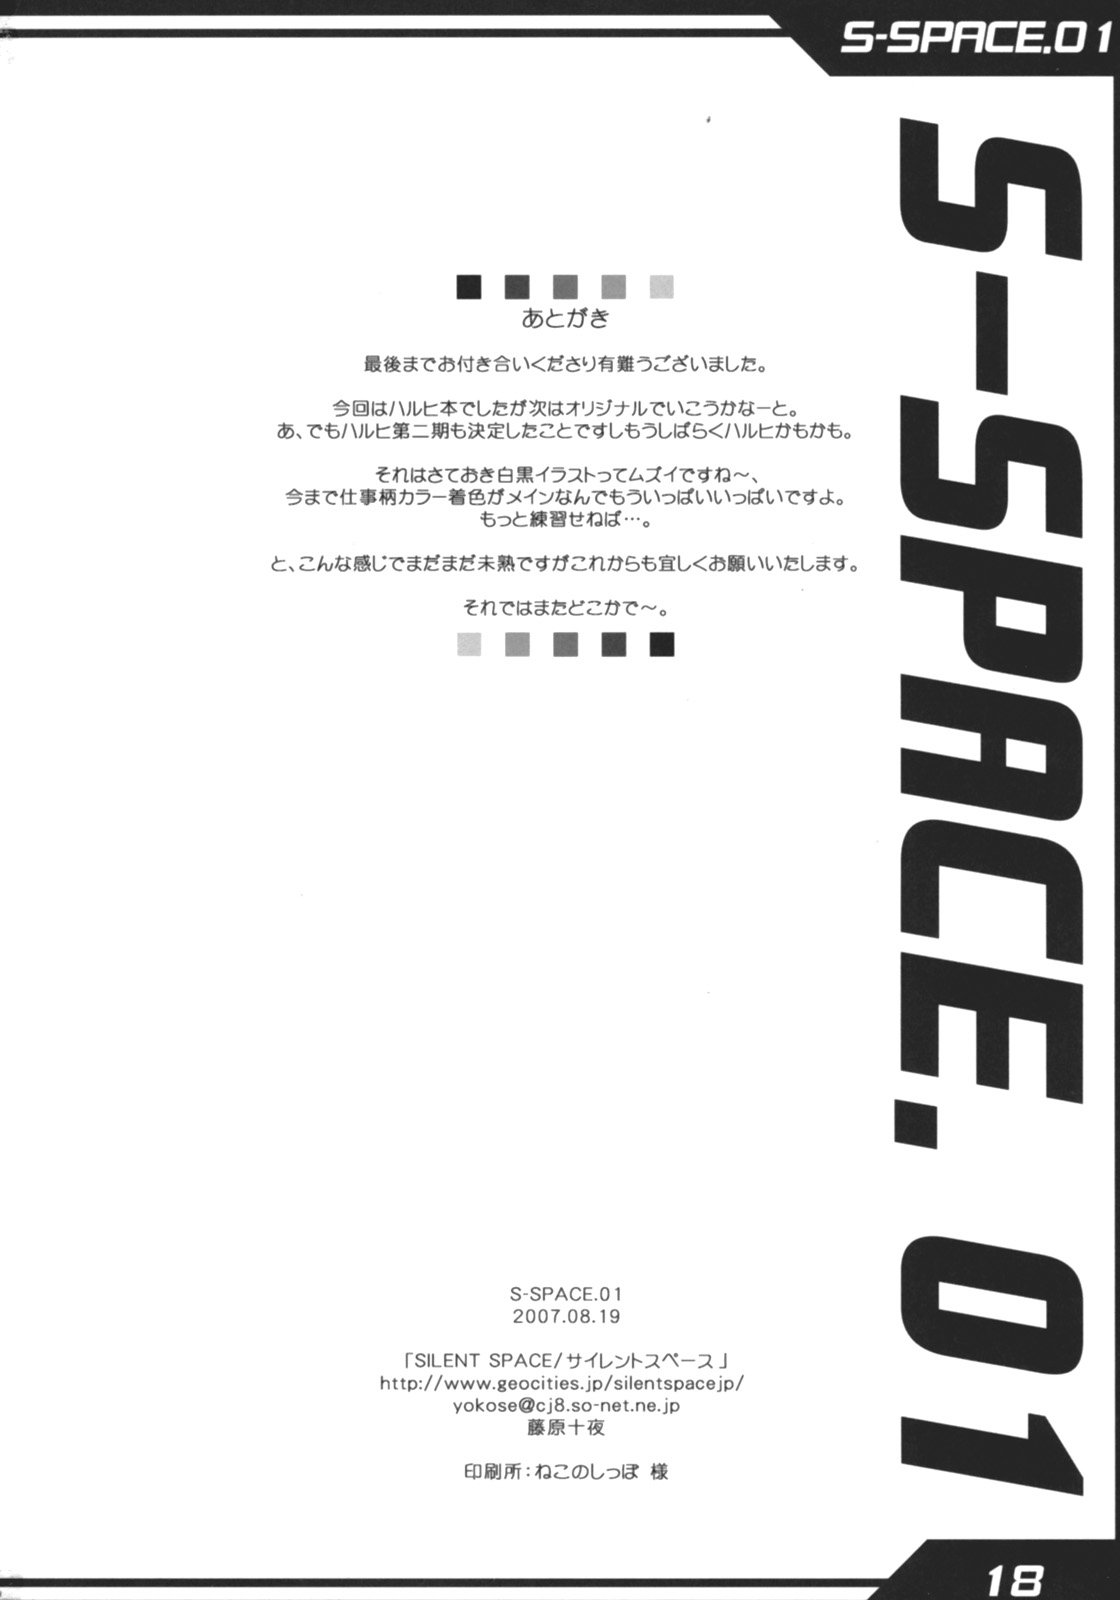 [Silent Space] S-SPACE.01 